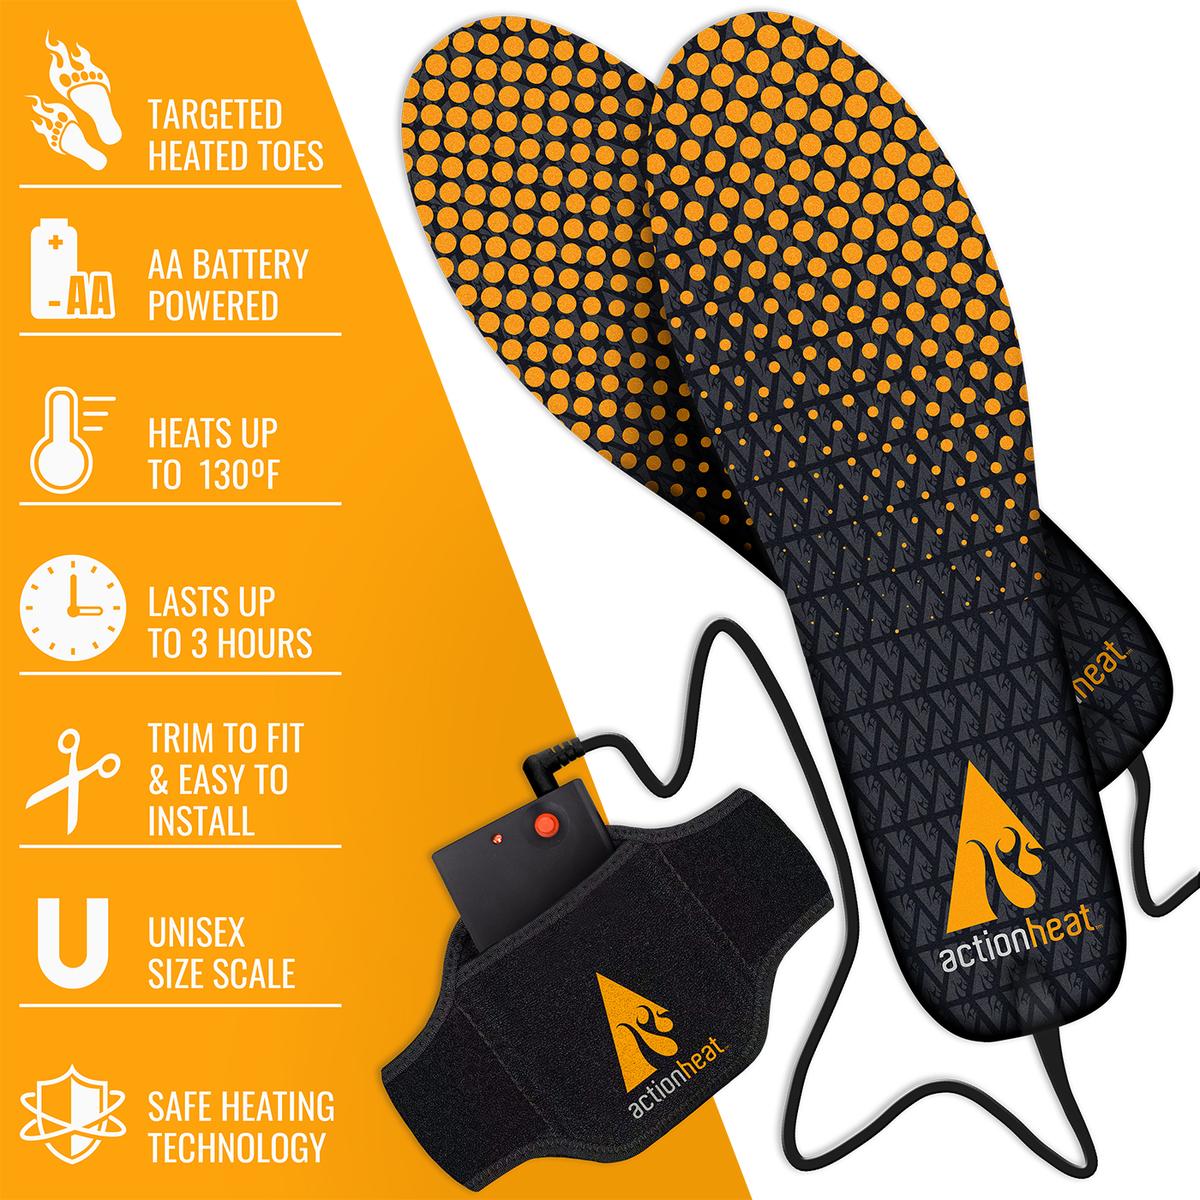 ActionHeat AA Battery Heated Insoles - Info